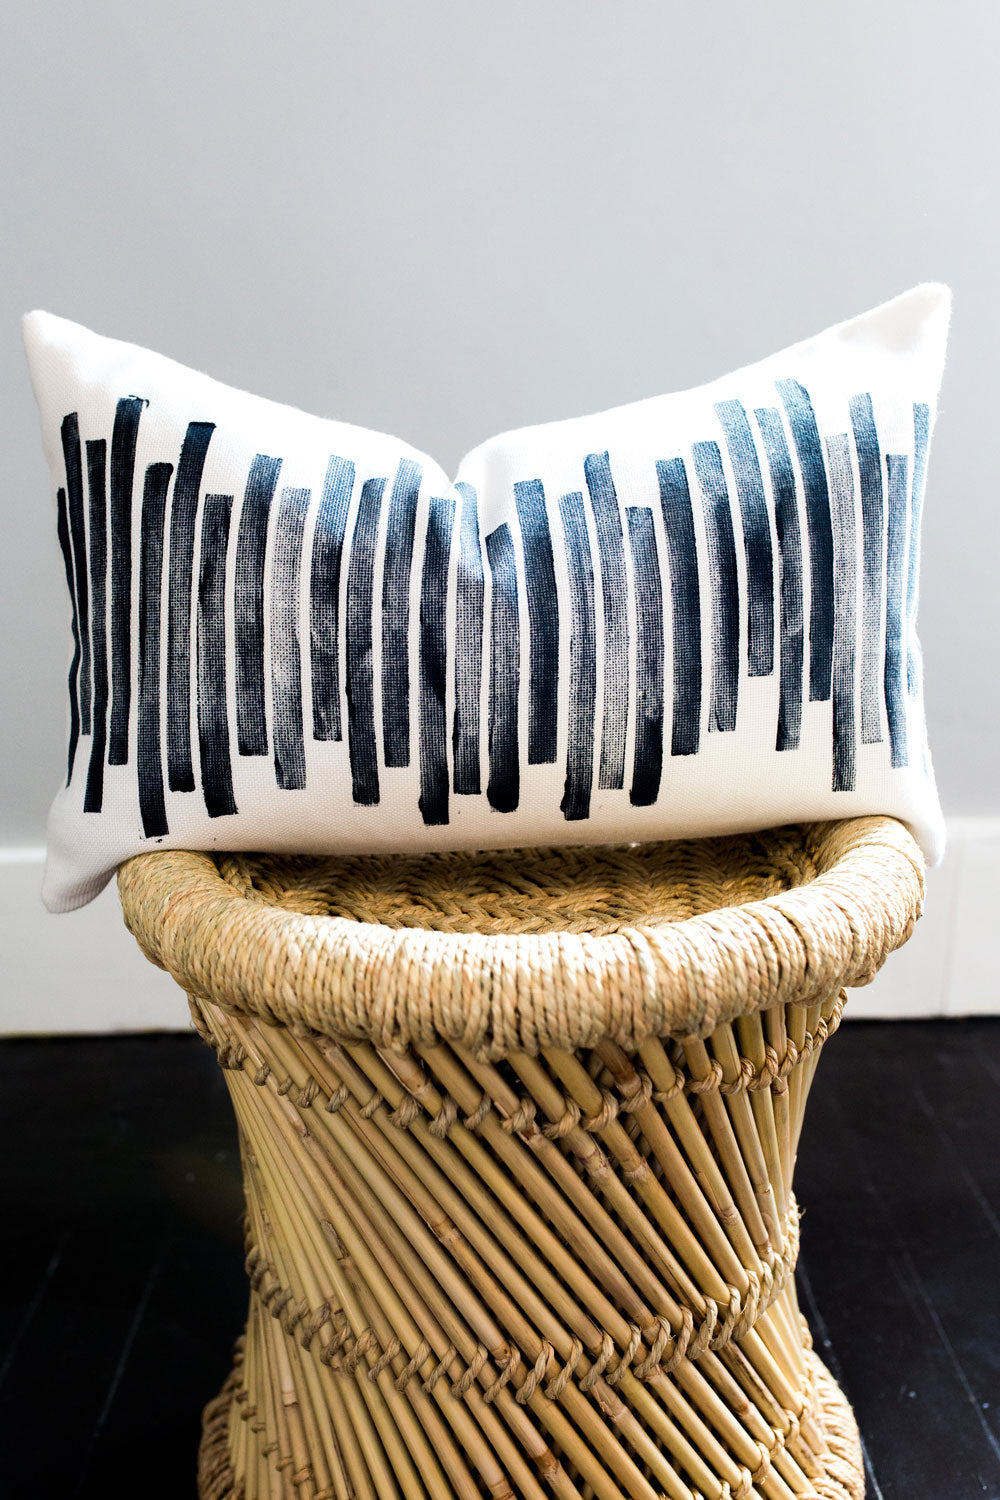 seven sixteen, becky pollard, bedroom decor, bedroom decor ideas, decorative pillow, printed pillow, neutral bedroom decor, neutral bedroom pillows, neutral accent pillows, accent pillow, striped pillow covers, blue and white pillows on couch, blue and white pillows on bed, neutral accent pillows on couch, neutral accent pillows on bed, blue and white pillows, striped pillows, blue striped pillow, block printed pillow, modern stripe pillow, modern striped pillow, modern stripe print 